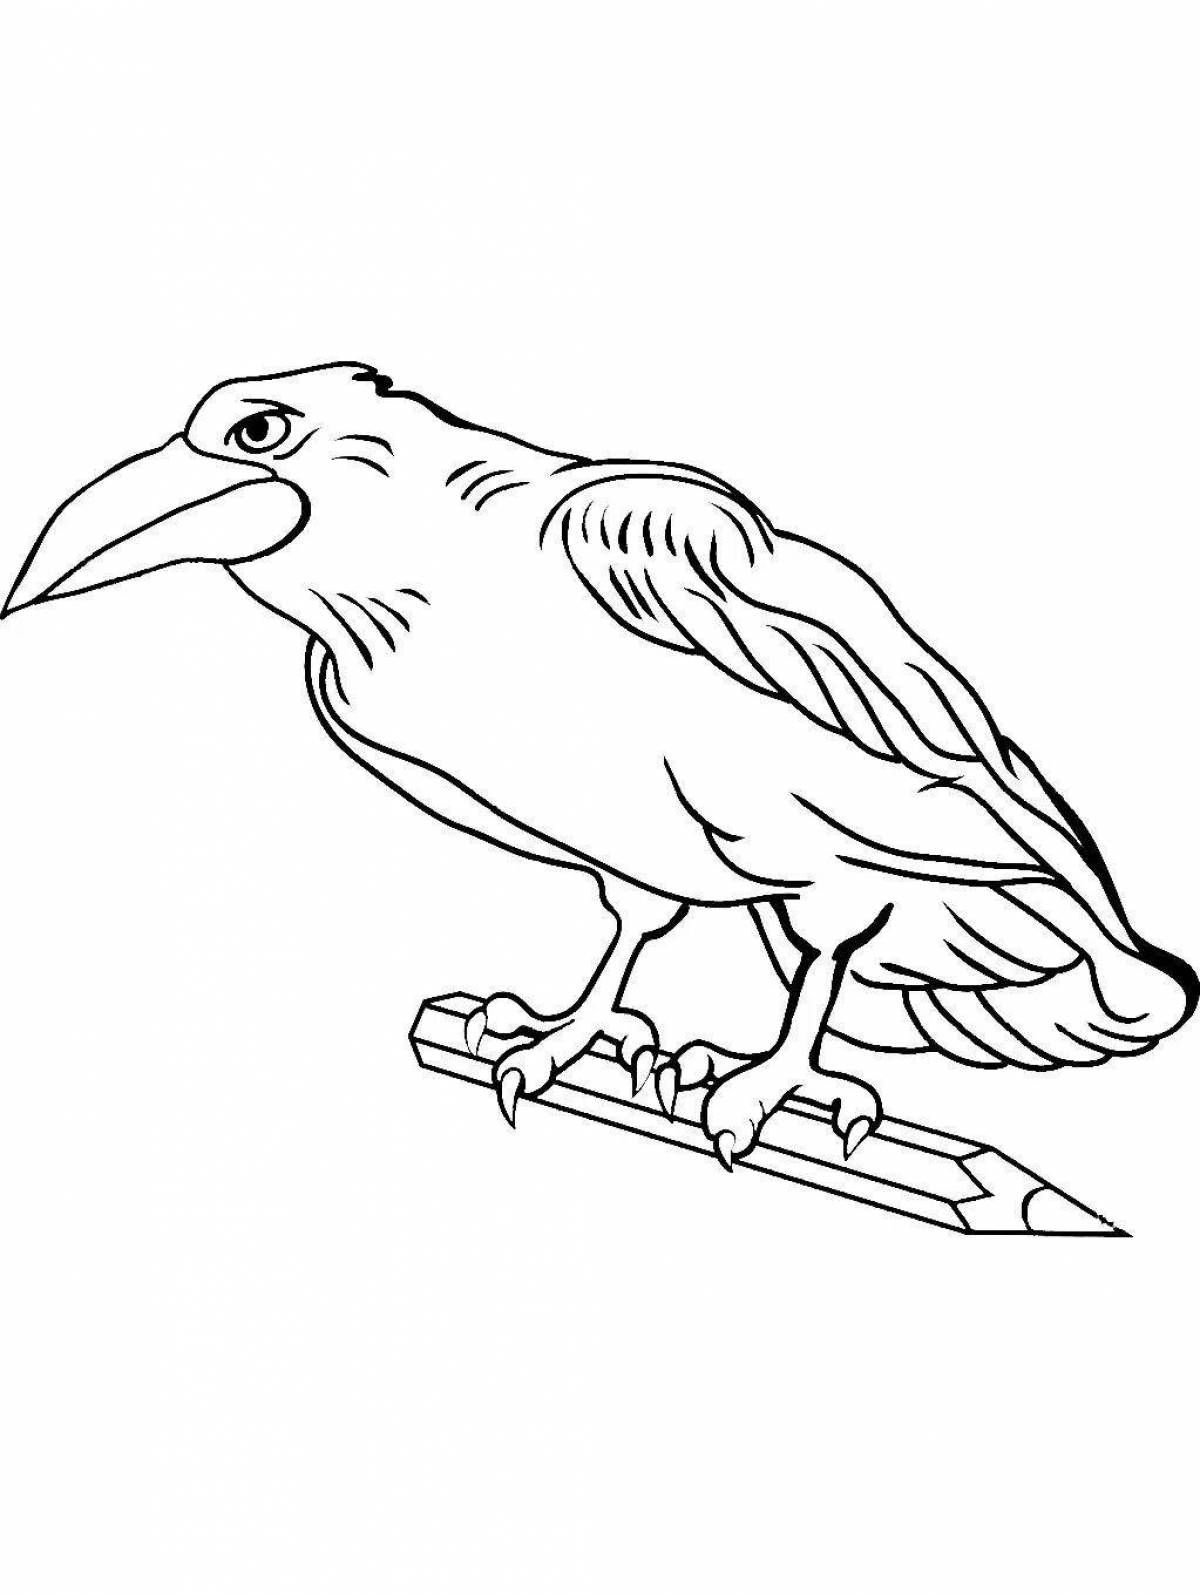 Creative crow coloring book for 6-7 year olds